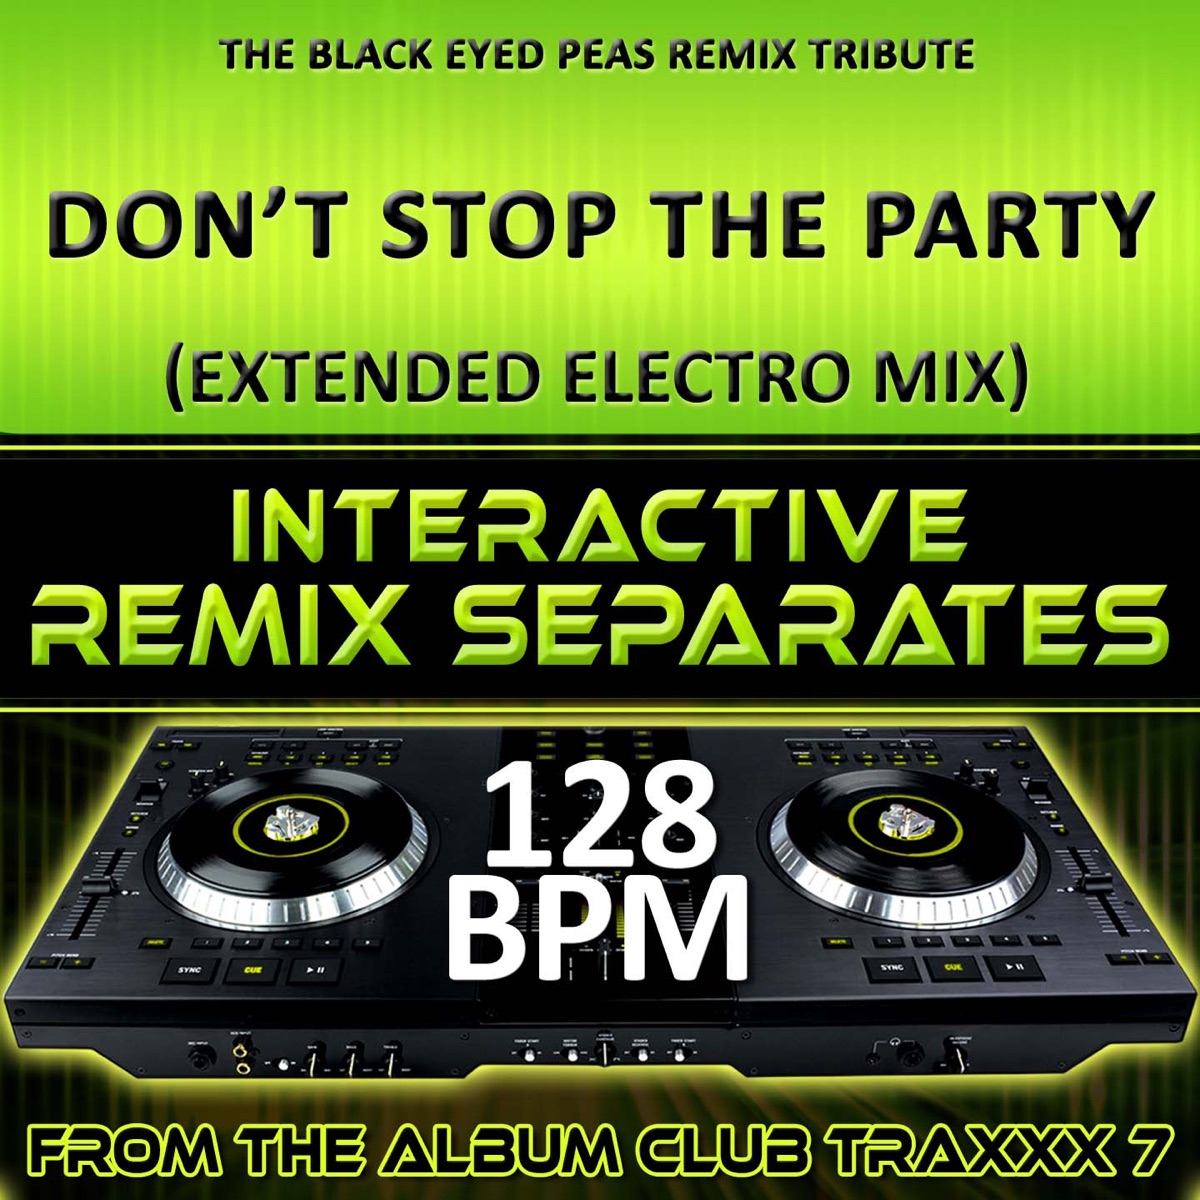 Don't Stop the Party (The Black Eyed Peas Remix Tribute)[128 BPM  Interactive Remix Separates] - Album by DJ Dizzy - Apple Music